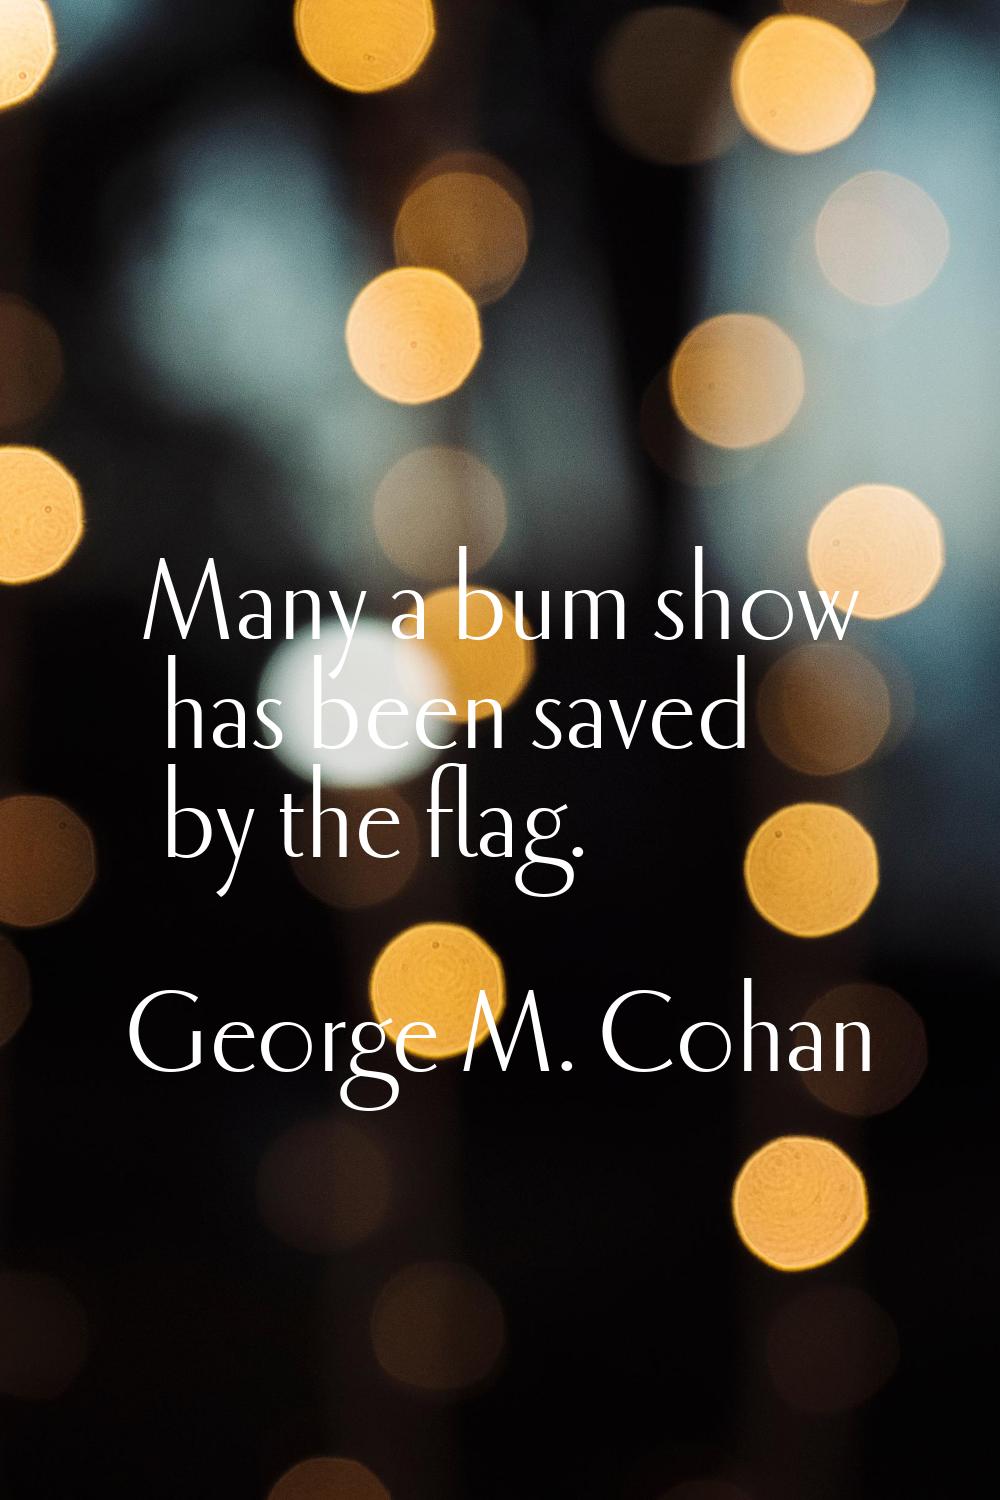 Many a bum show has been saved by the flag.